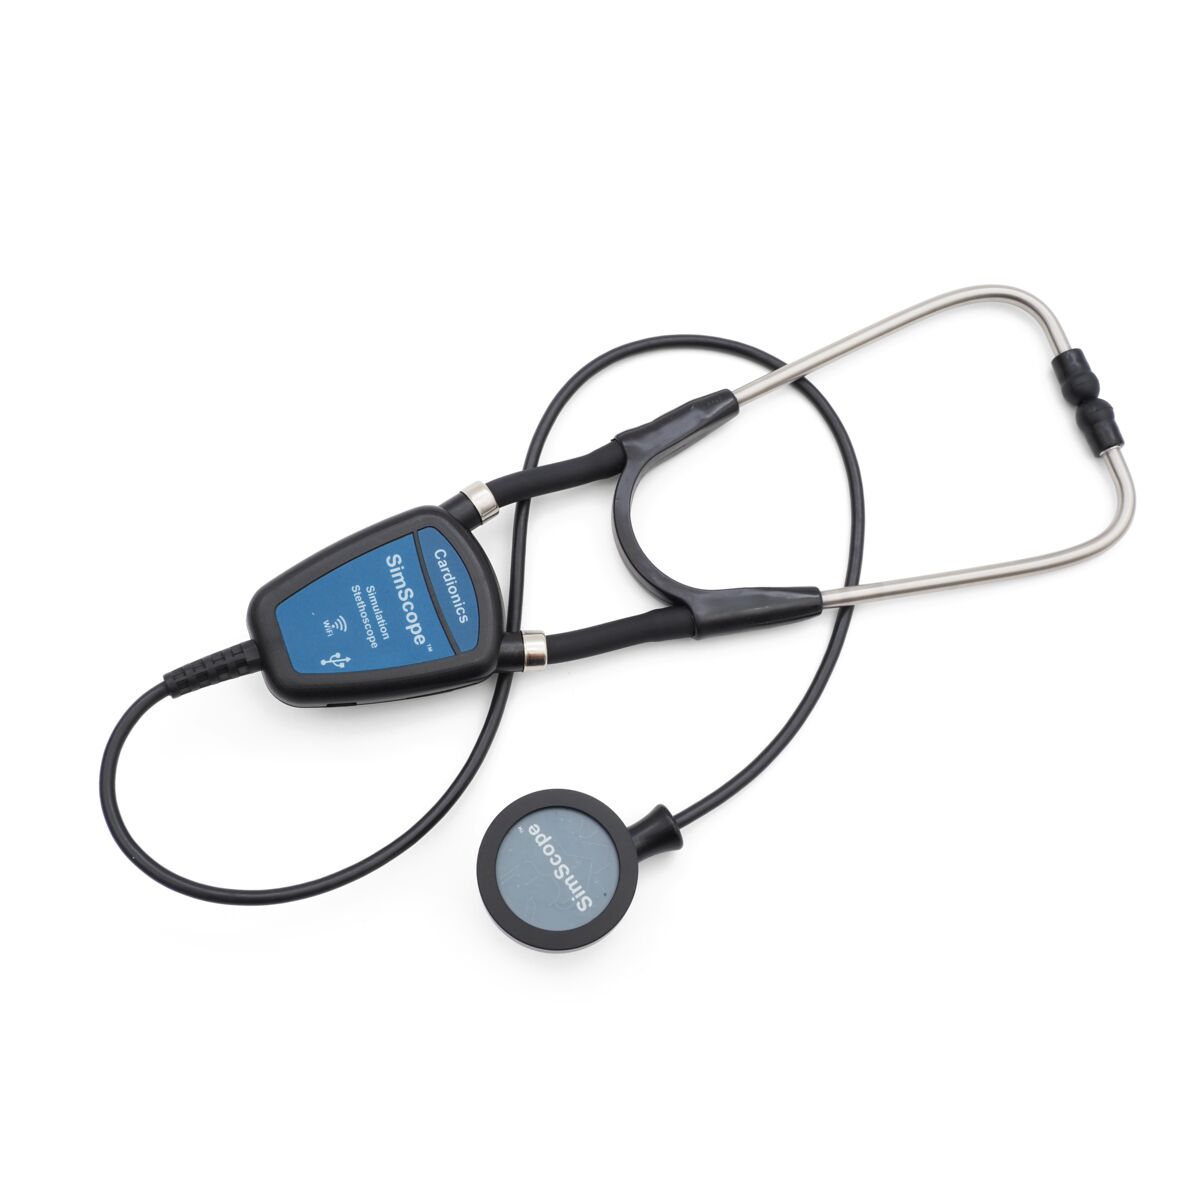 Medical devices: a stethoscope for auscultation of patients and